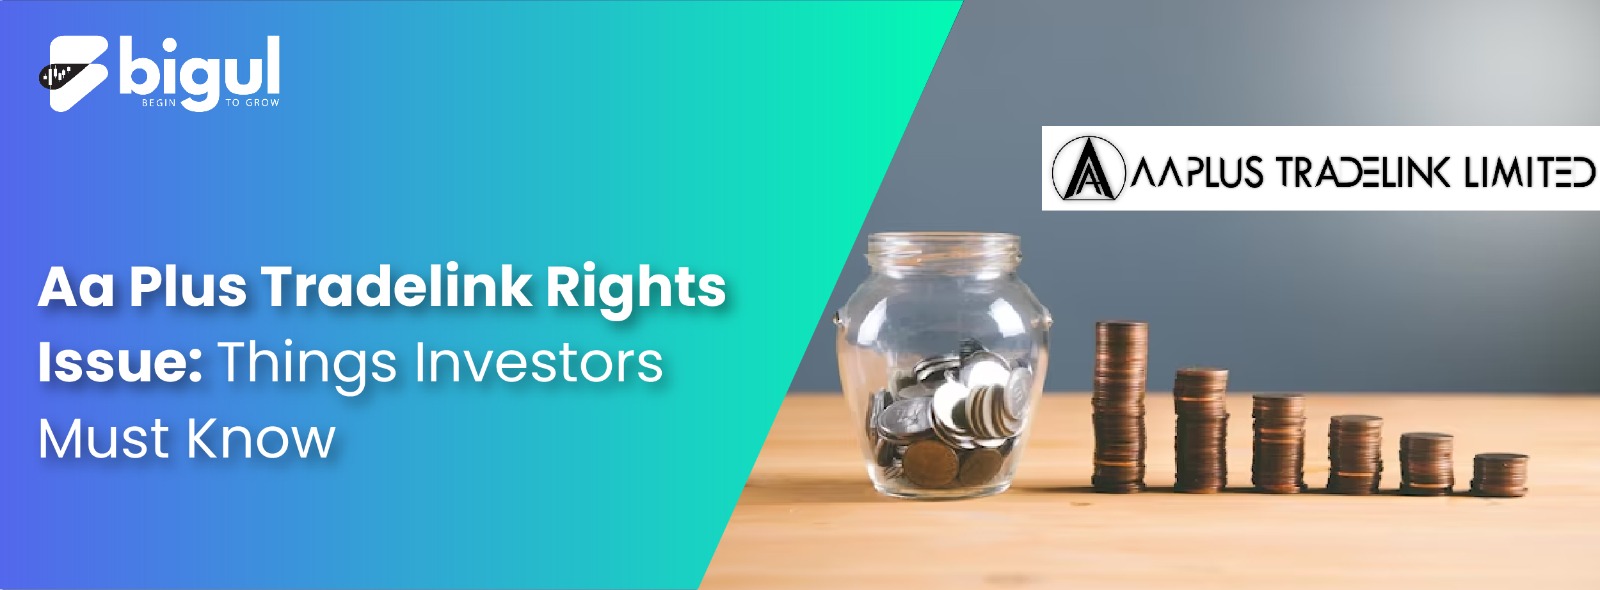 Aa Plus Tradelink Rights Issue: Things Investors Must Know